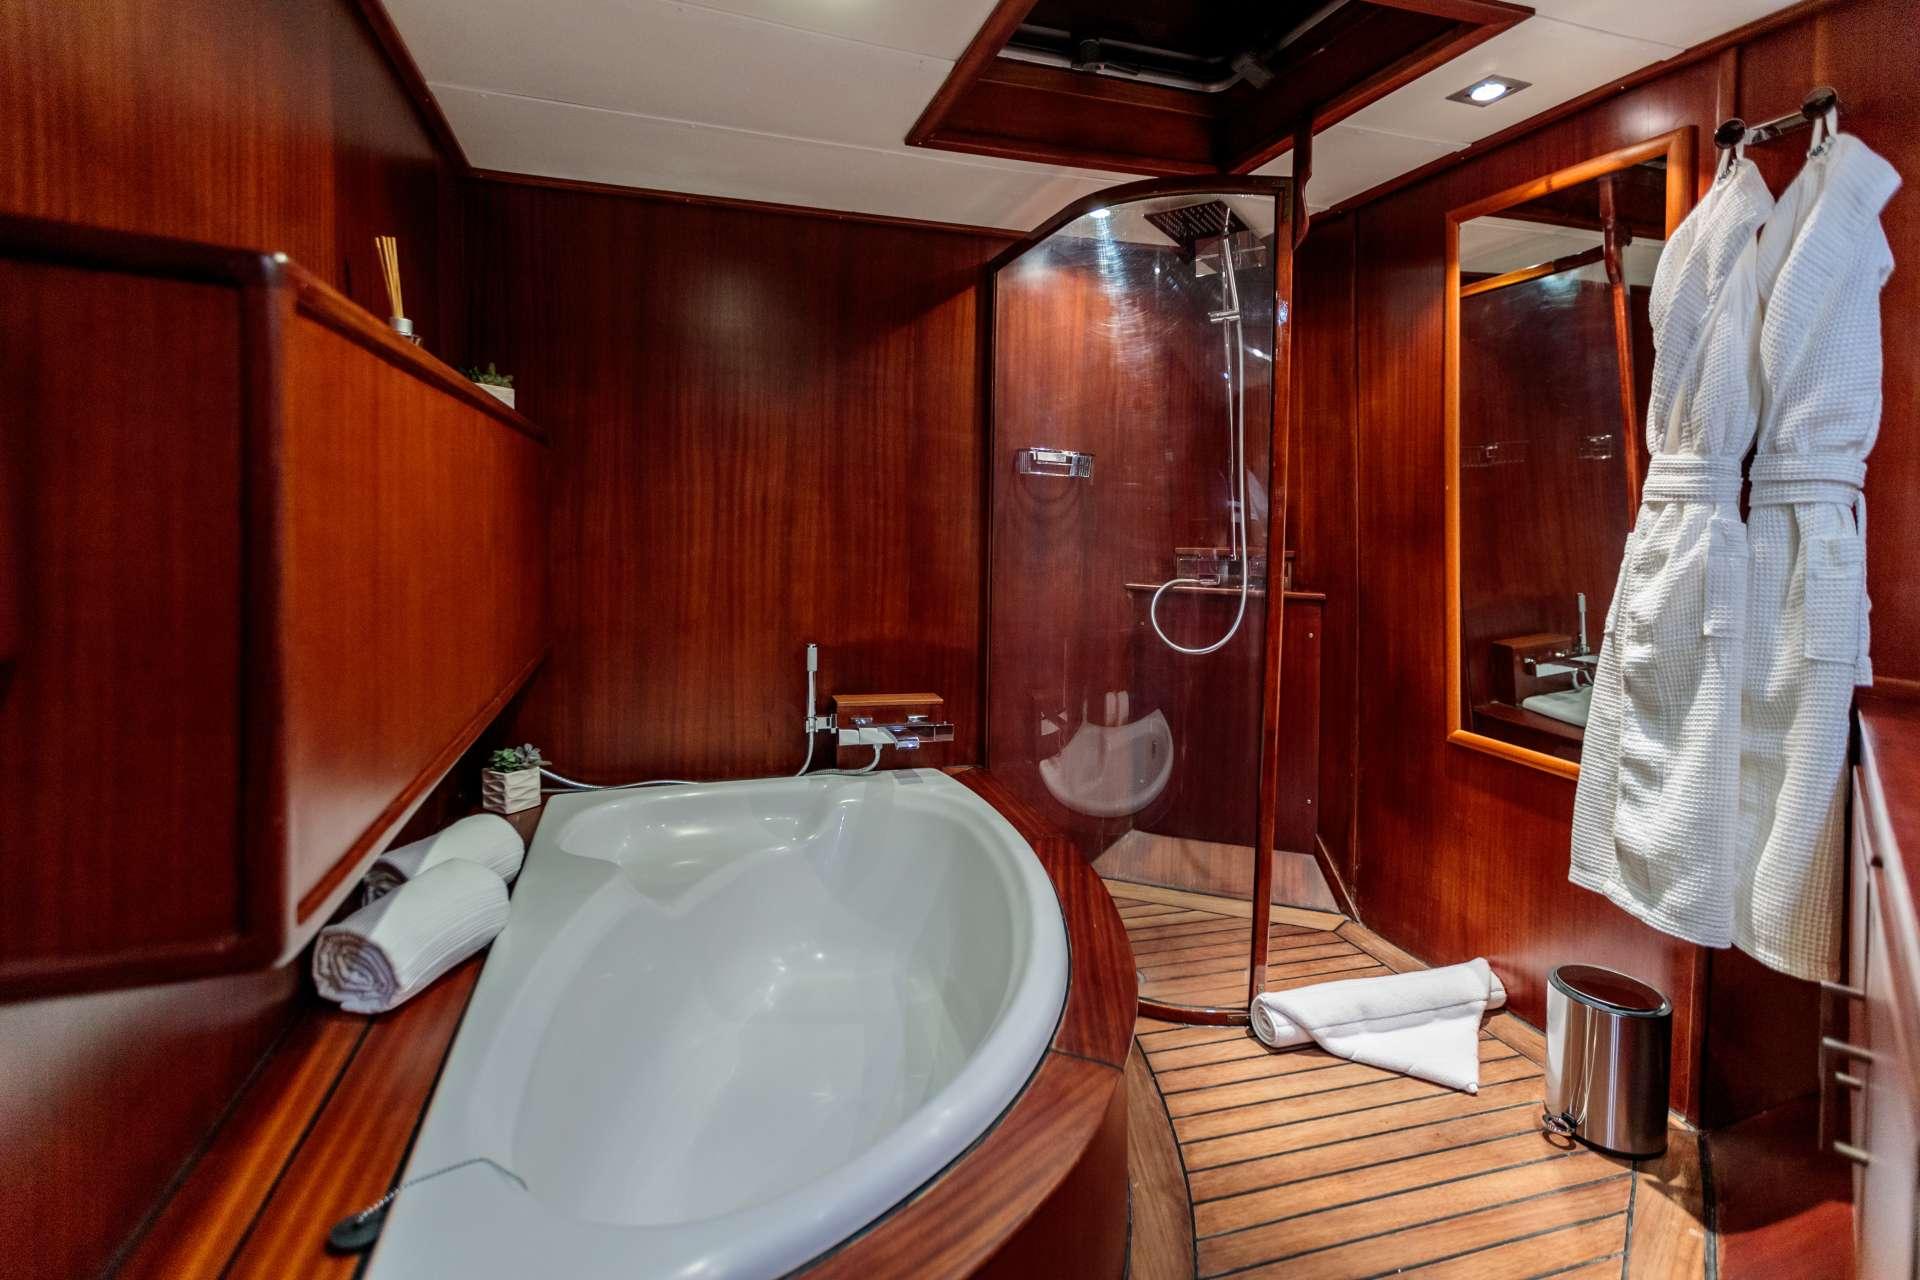 Vita Dolce Gulet Master Bedroom for Family Cruise & Corporate Event - High Point Yachting